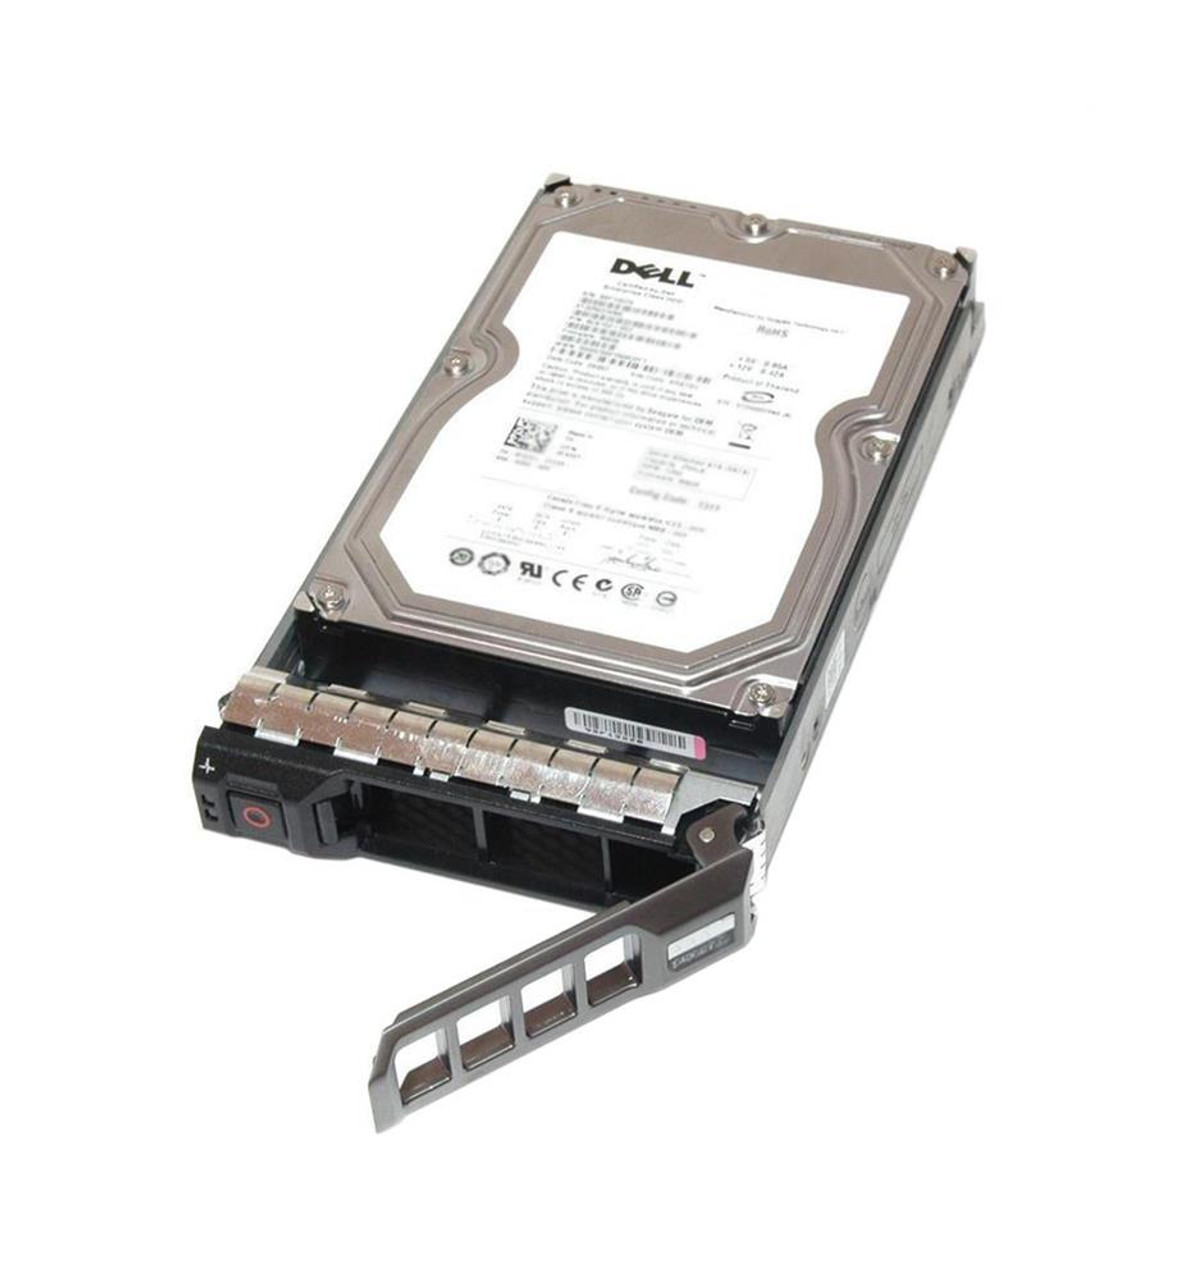 W9TCY Dell 10TB 7200RPM SAS 12Gbps Nearline Hot Swap (512e) 3.5-inch Internal Hard Drive with Tray